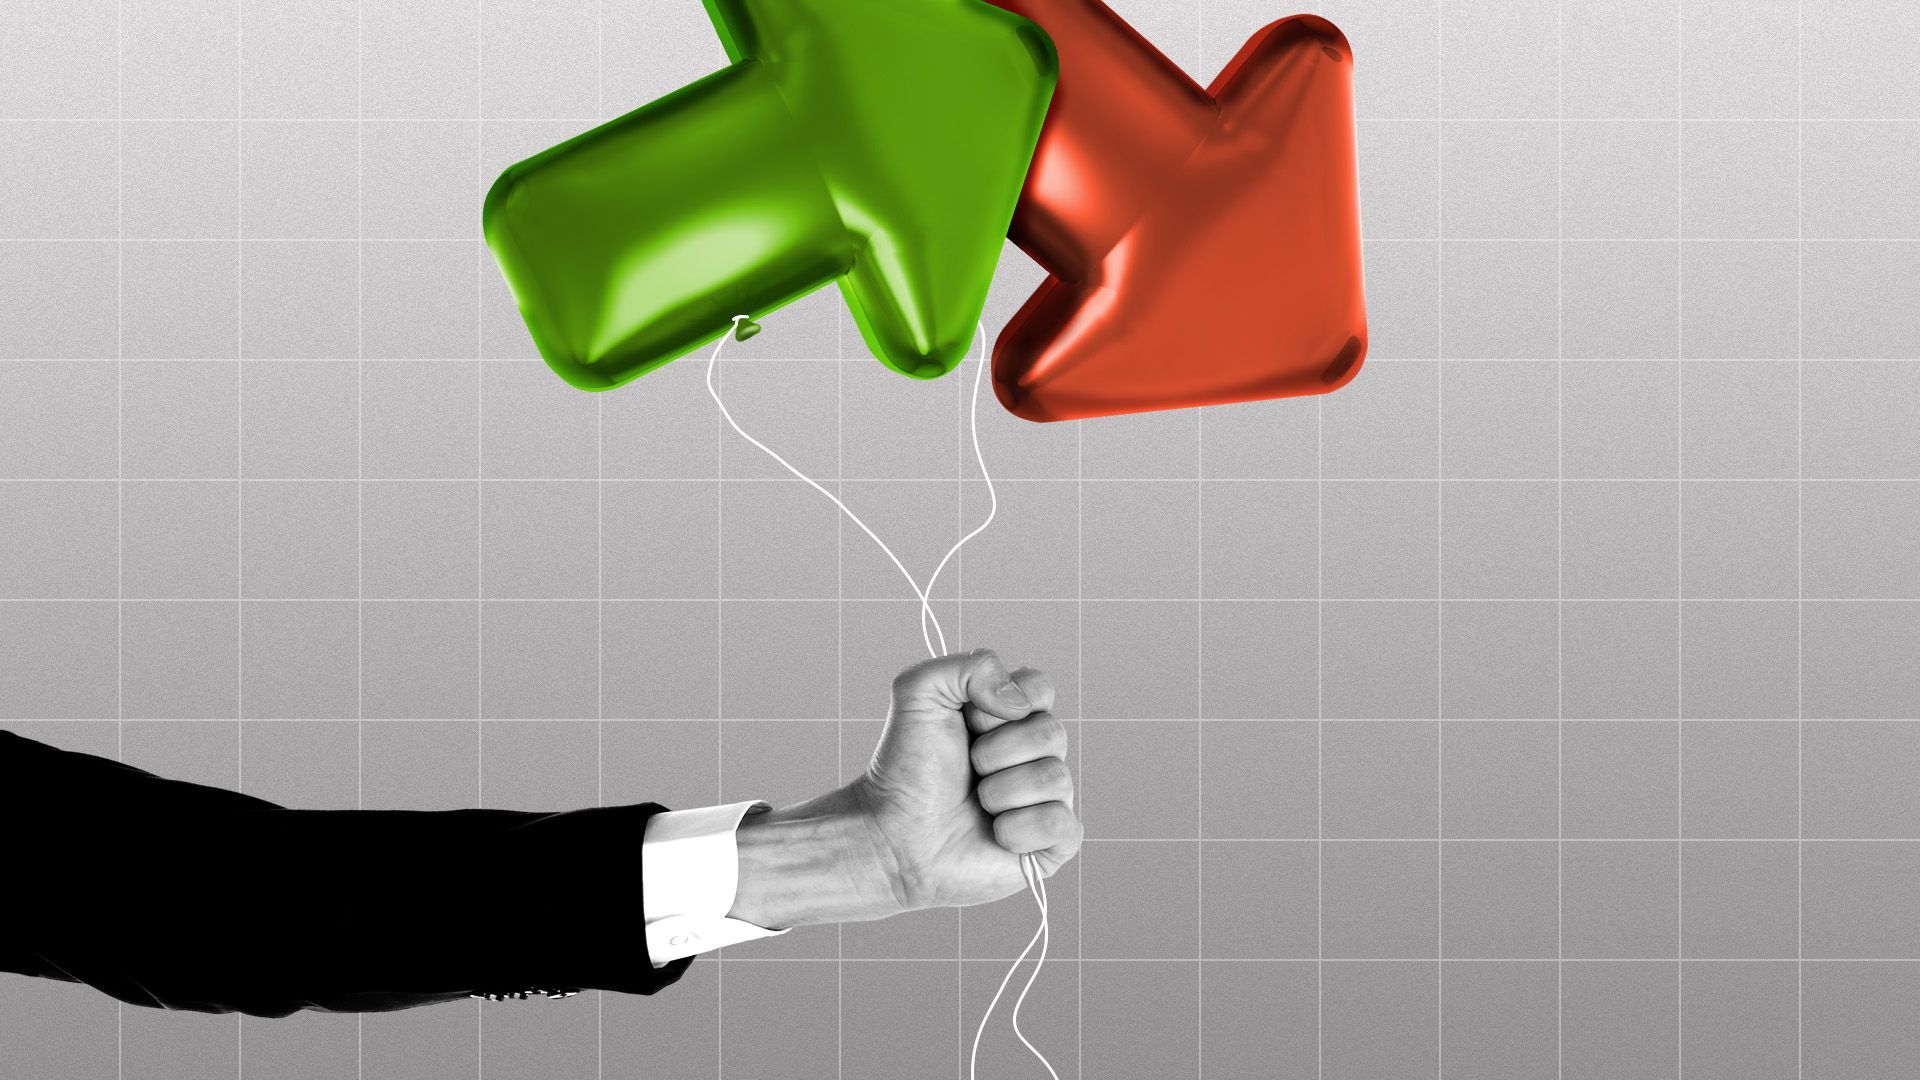 Illustration of an outstretched arm holding one green and one red arrow-shaped balloon